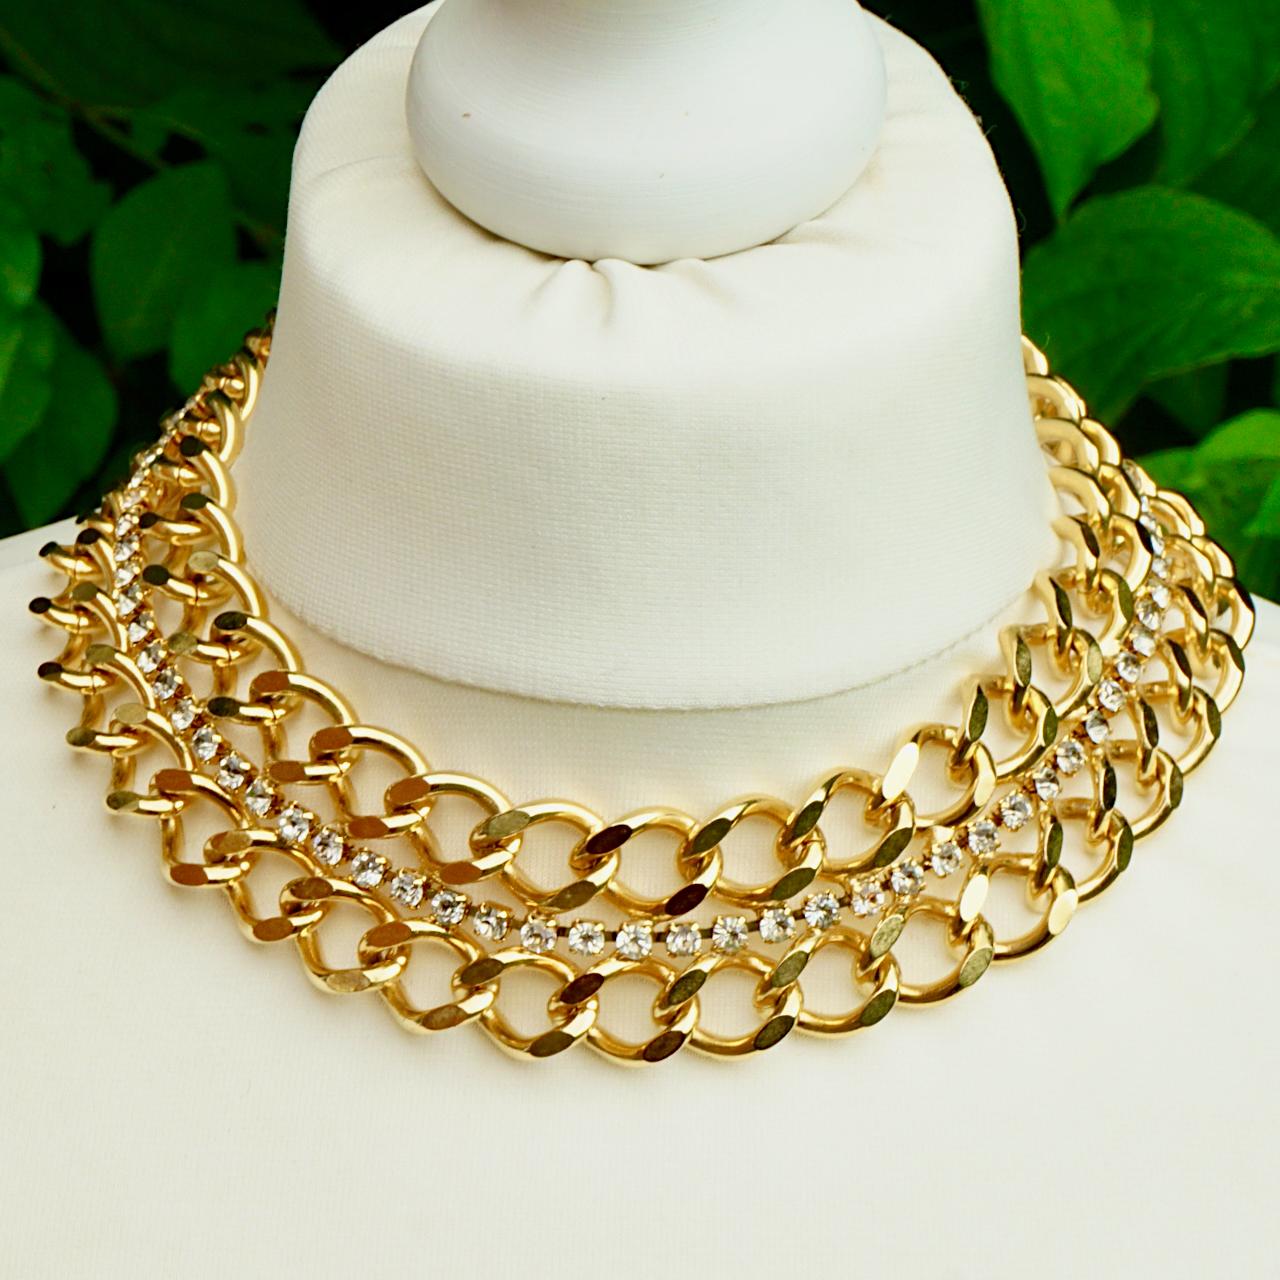 
Fabulous gold plated curb link chain necklace, featuring a single row of clear faceted rhinestones. Measuring length 40.3 cm / 15.8 inches by width 3 cm / 1 inch. The necklace is in very good condition, it has never been worn.

This is a stylish